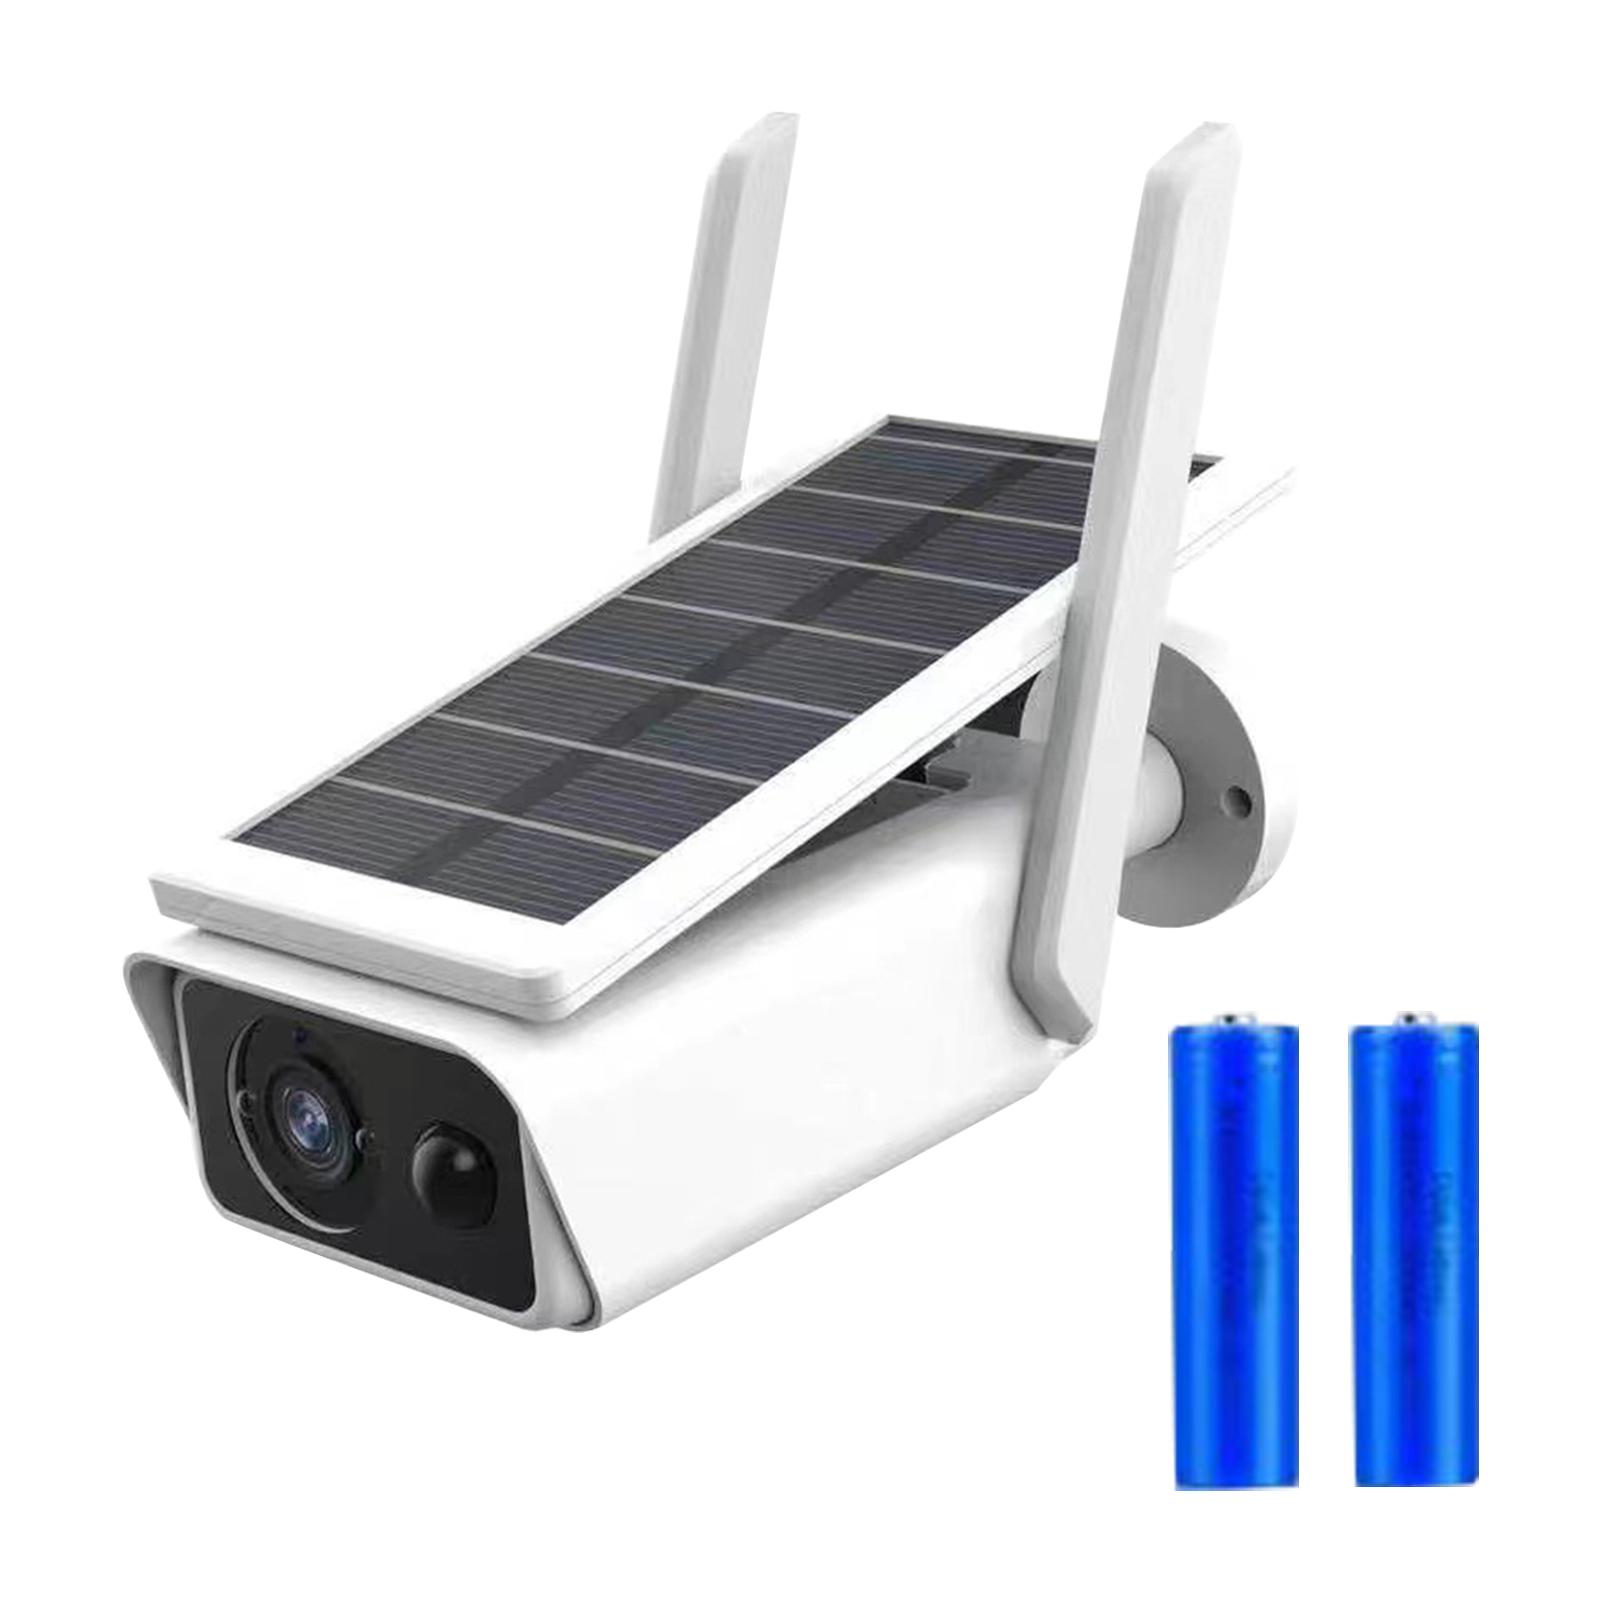 Solar Camera Wireless Outdoor WiFi 8W Solar Battery Powered 3MP Security Camera With Solar Panel For Home Office School with 2 batteries